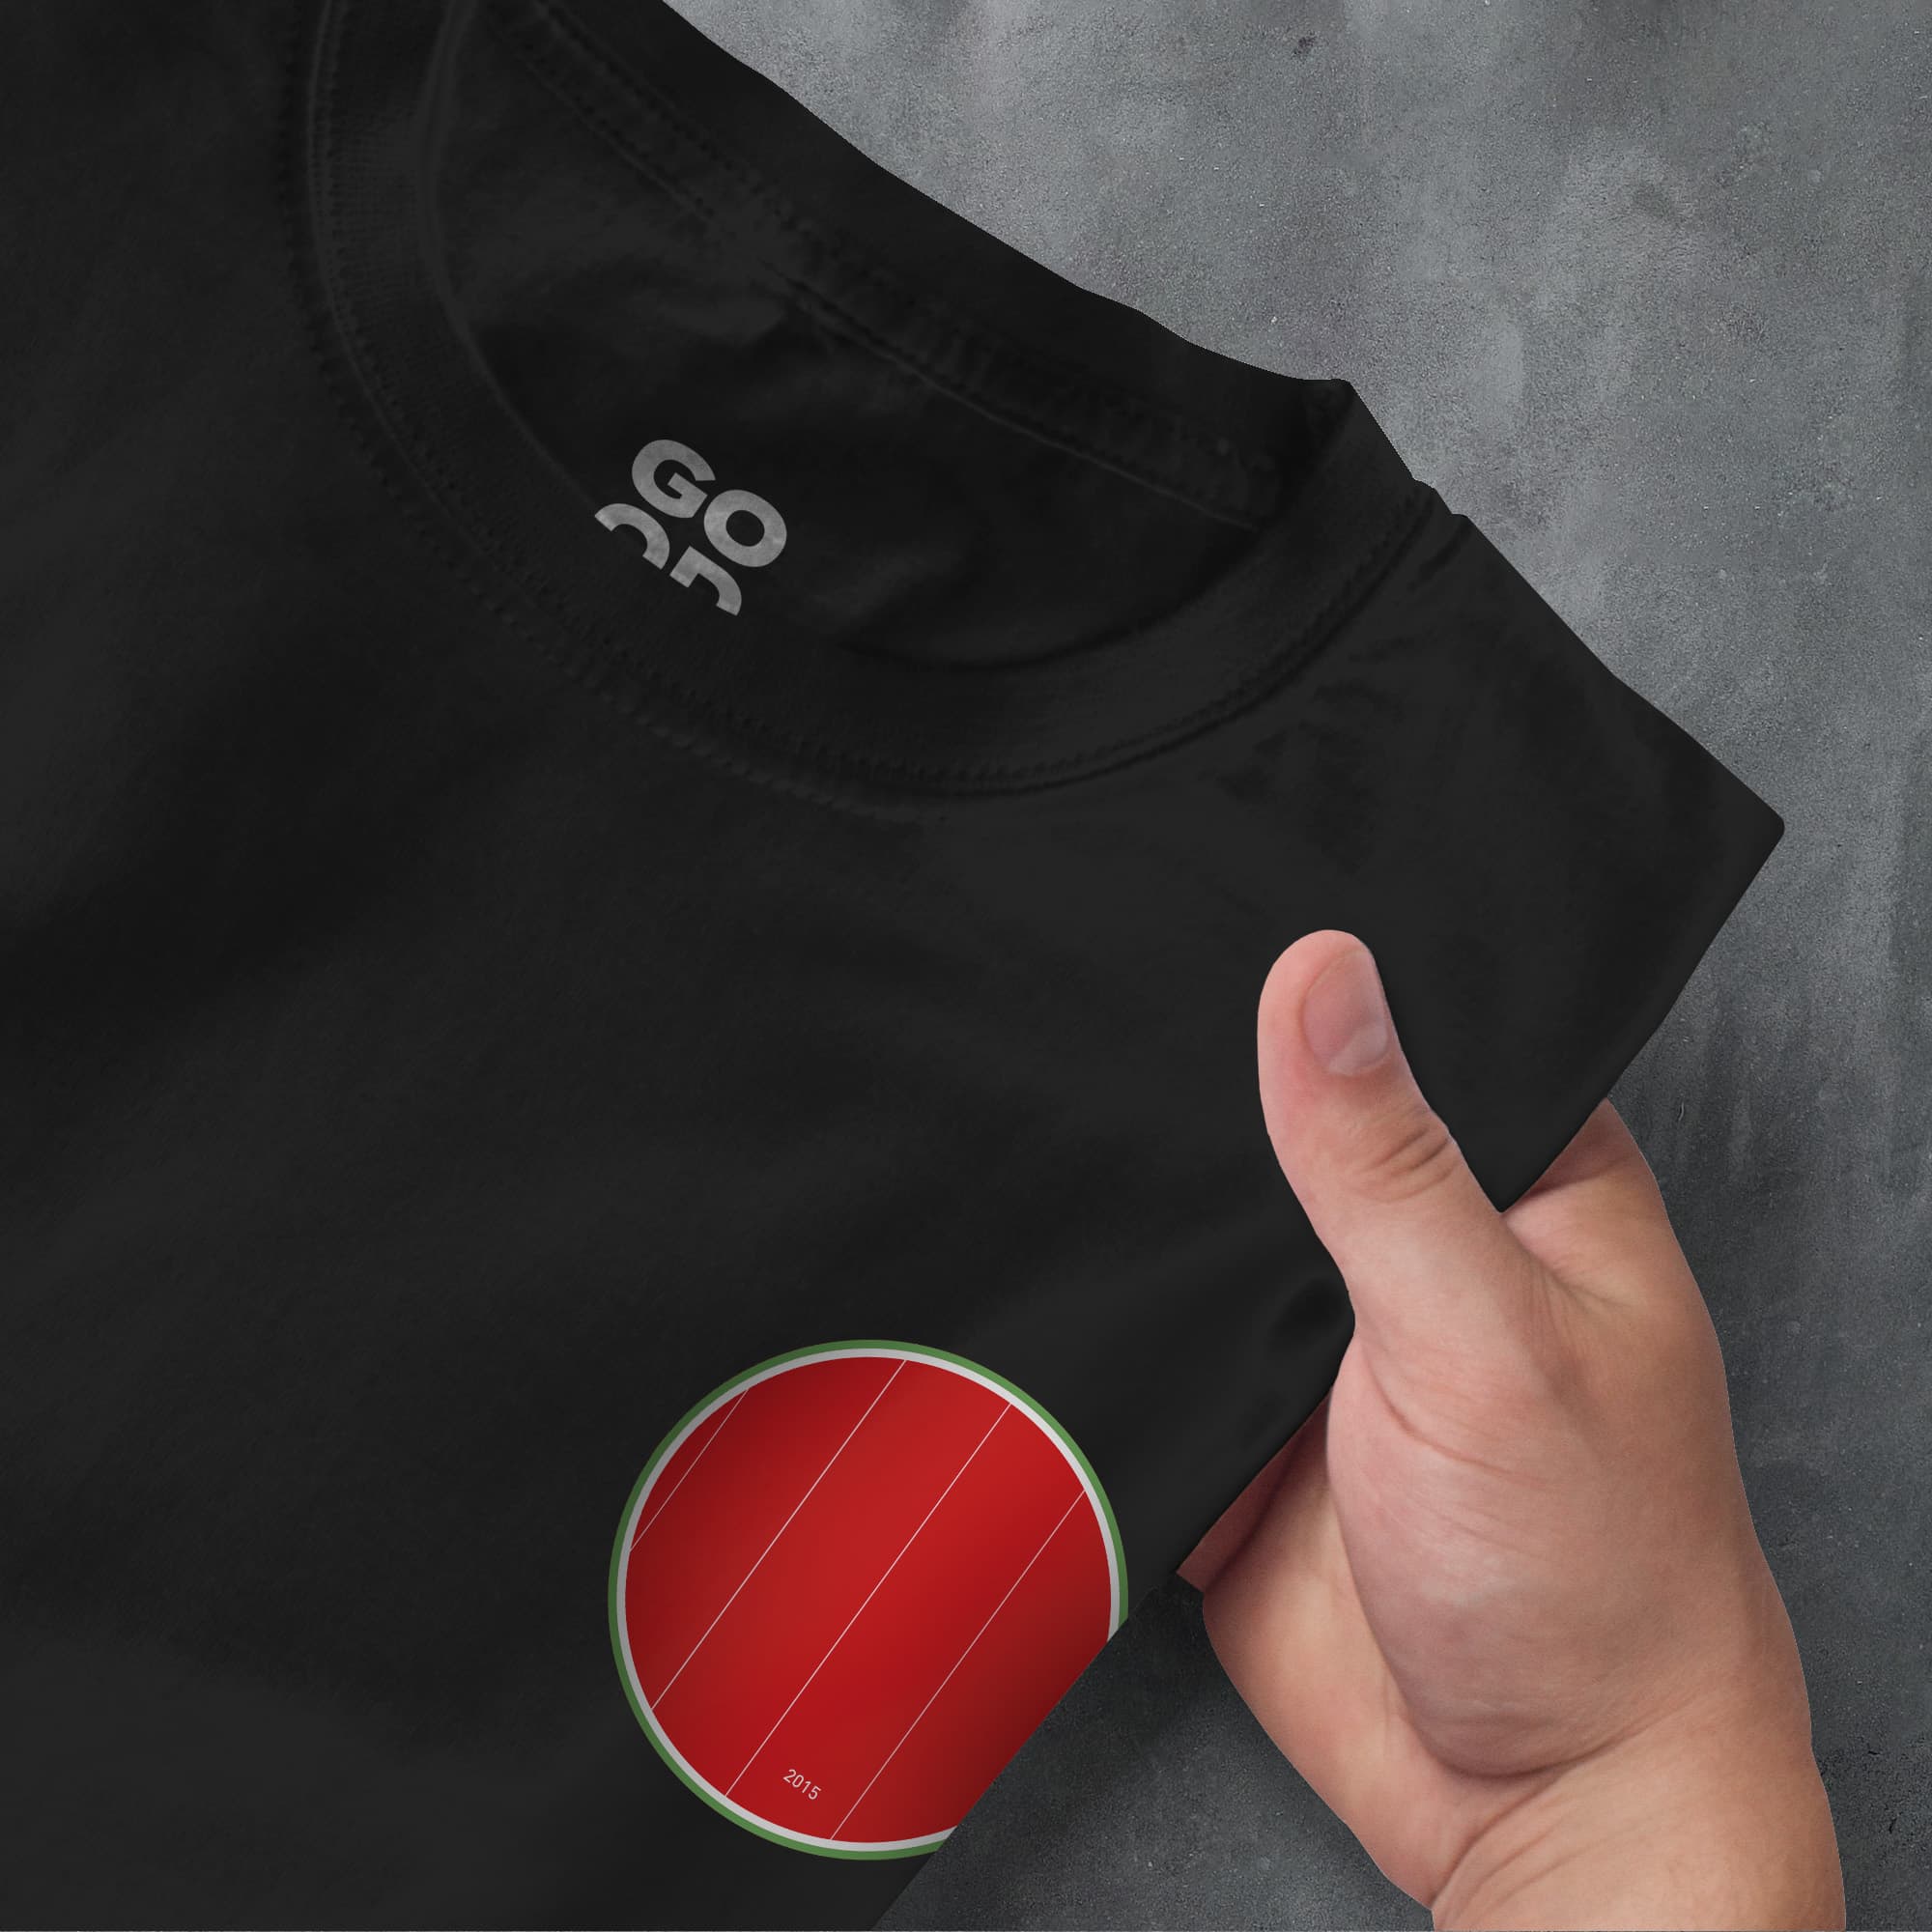 a hand pointing at a black shirt with a red circle on it